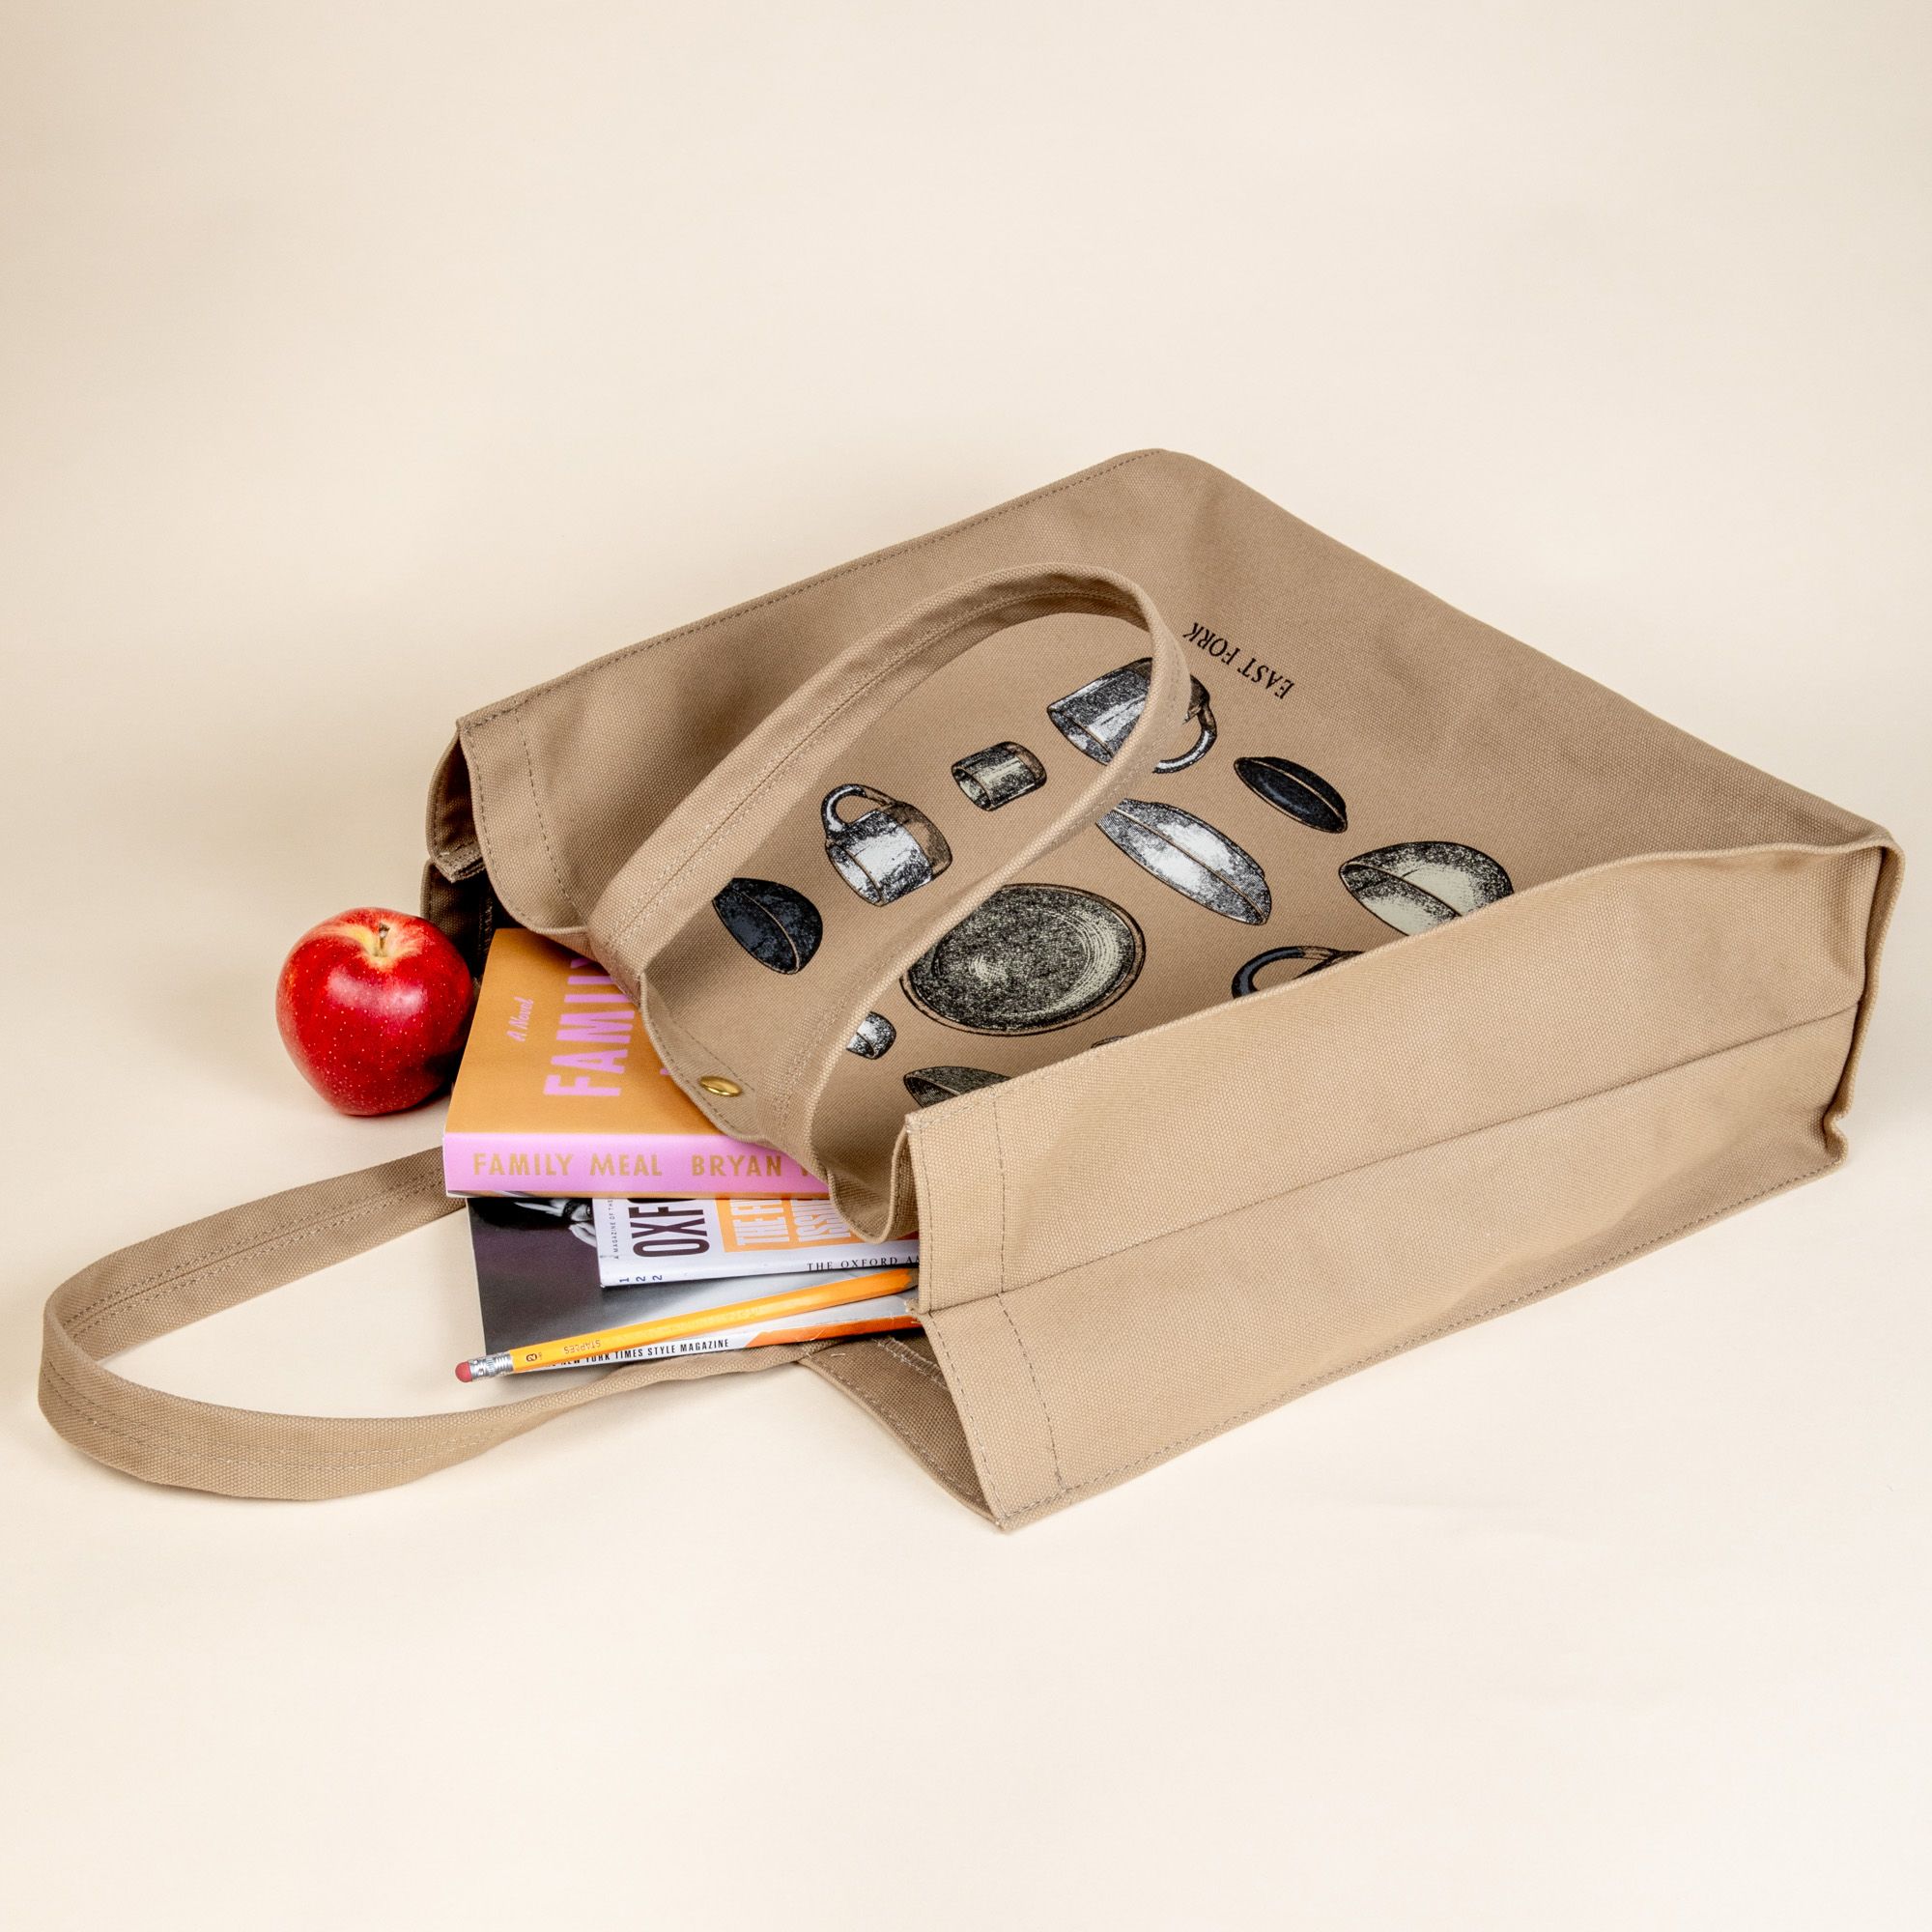 A sturdy canvas tan tote bag on its side with handles and a metal closure button at the top. On the bag is a printed illustration in neutral colors of bowls, plates, and mugs. Books, a pencil, and an apple are falling out of the bag.